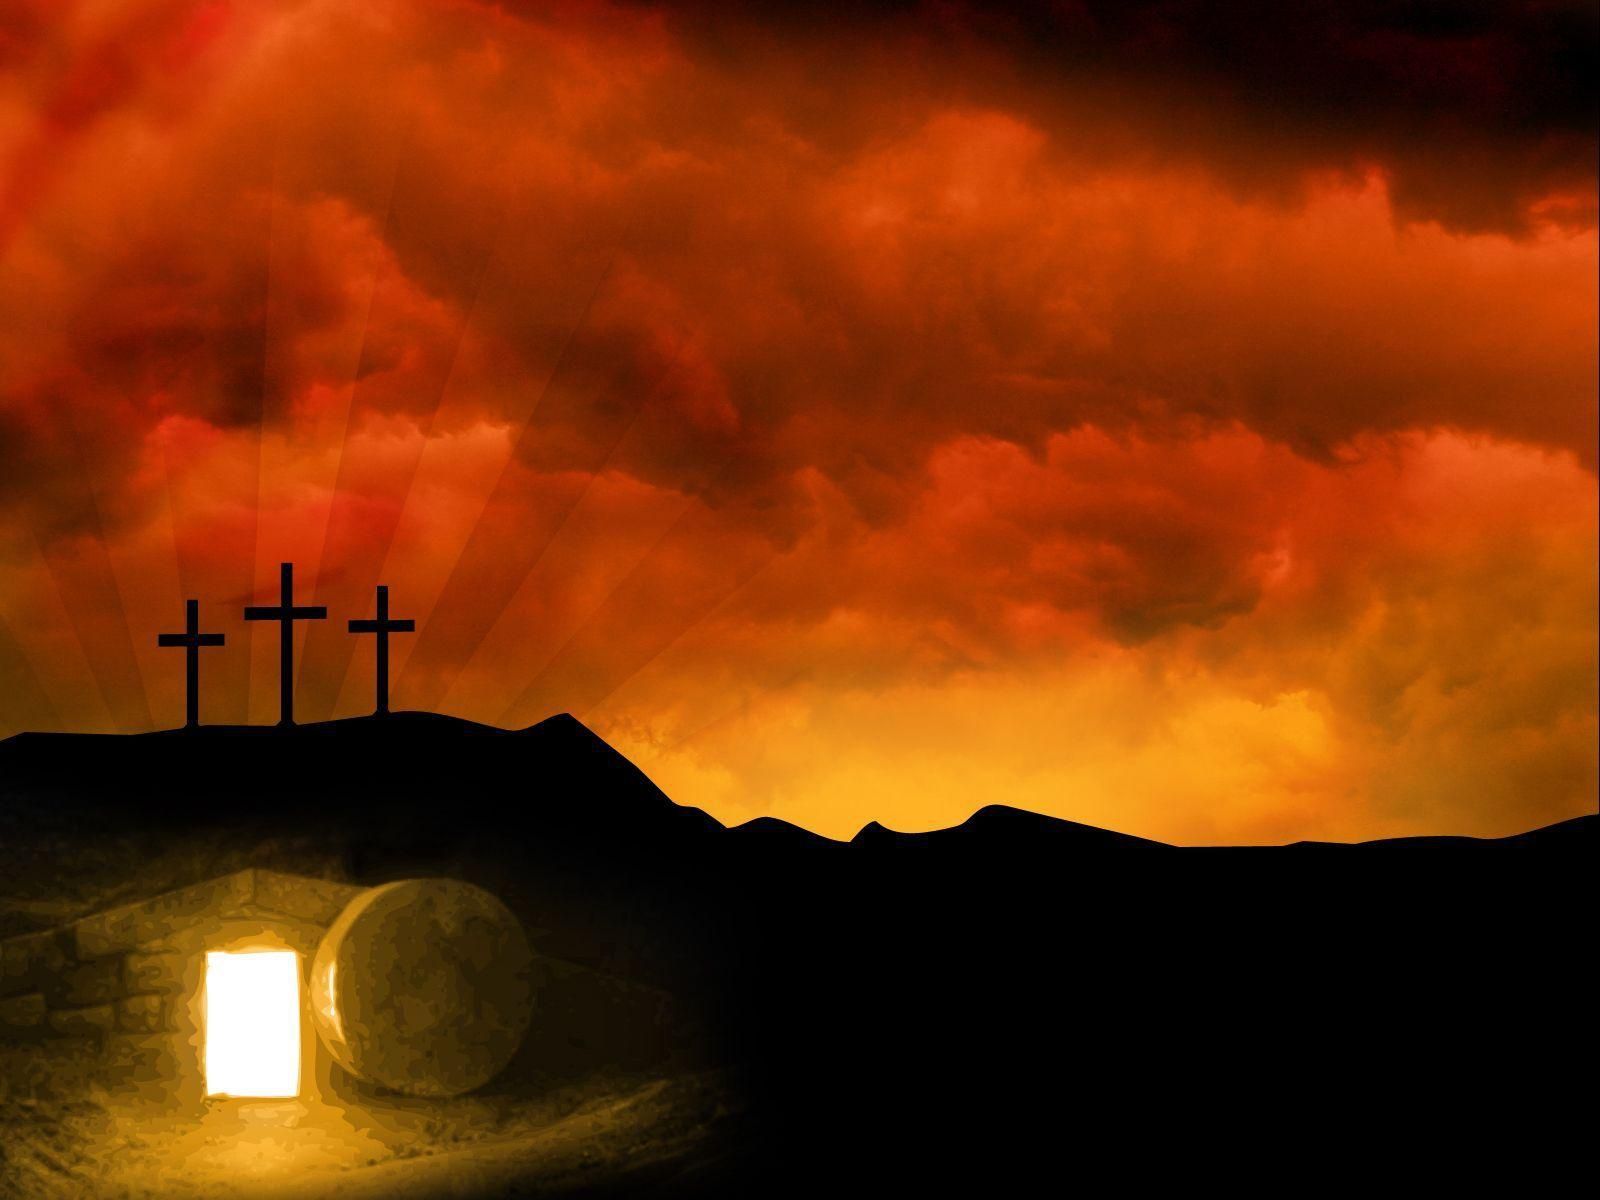 Happy Easter Christian Background